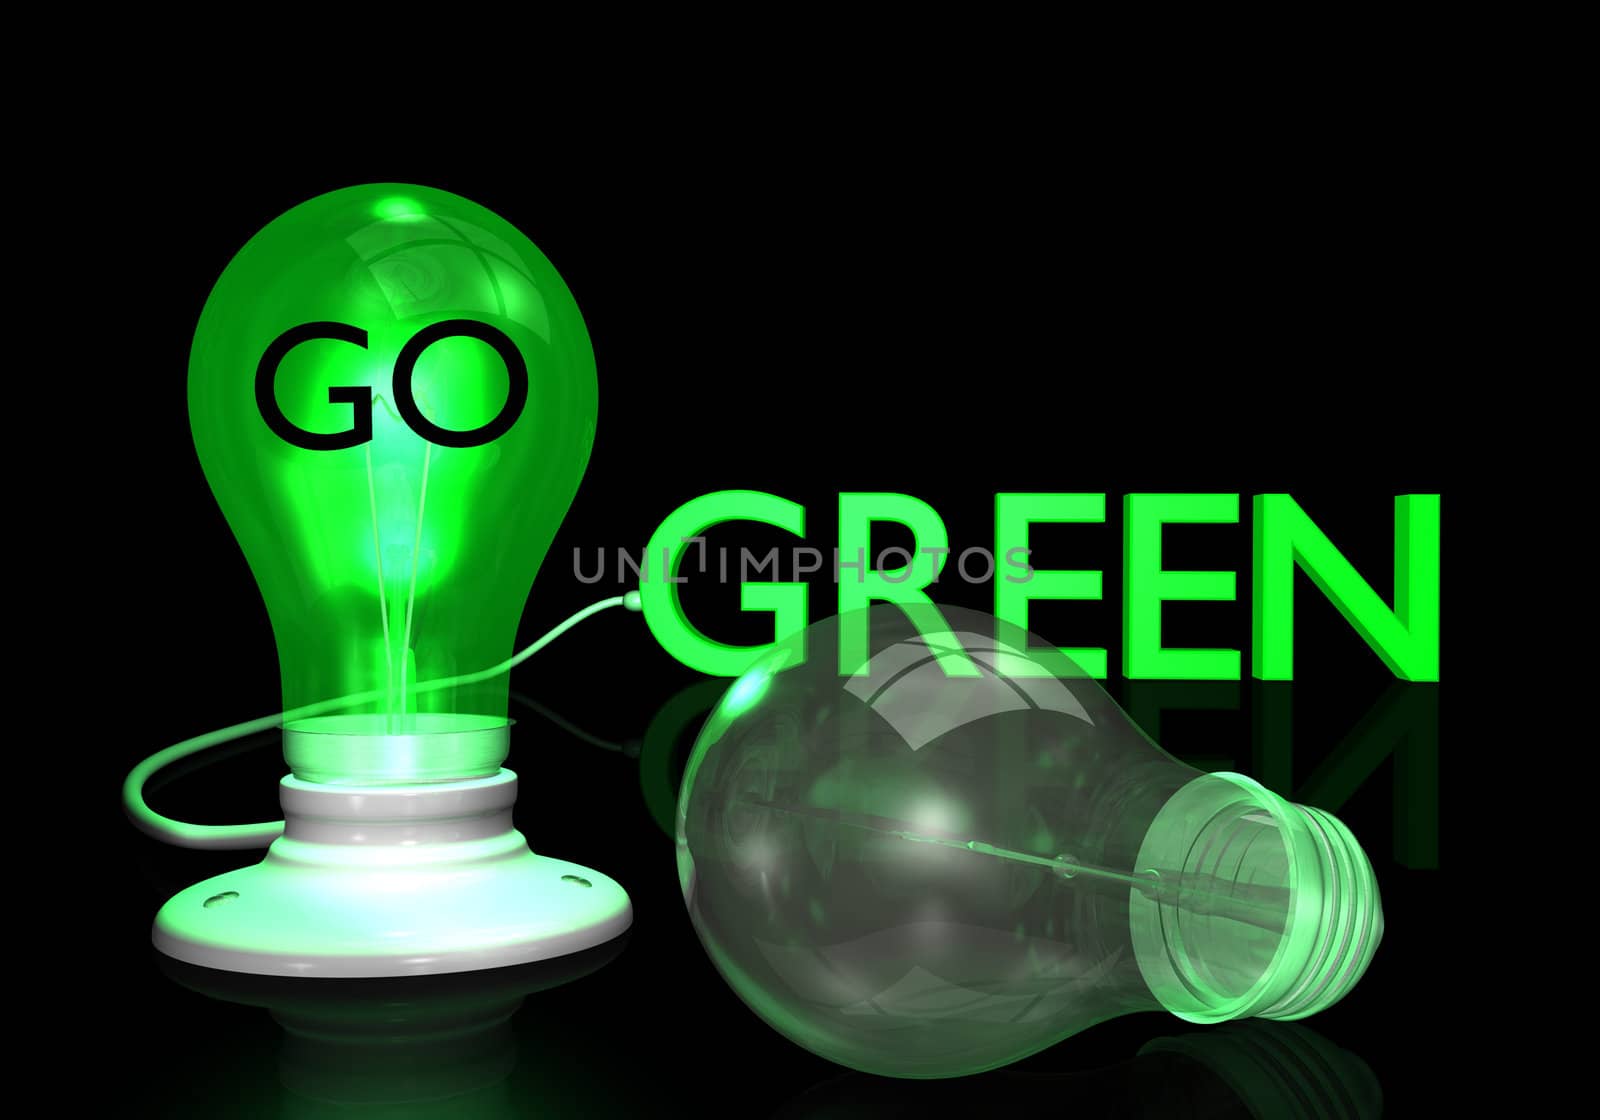 Green light bulb showing the "Go Green" concept.